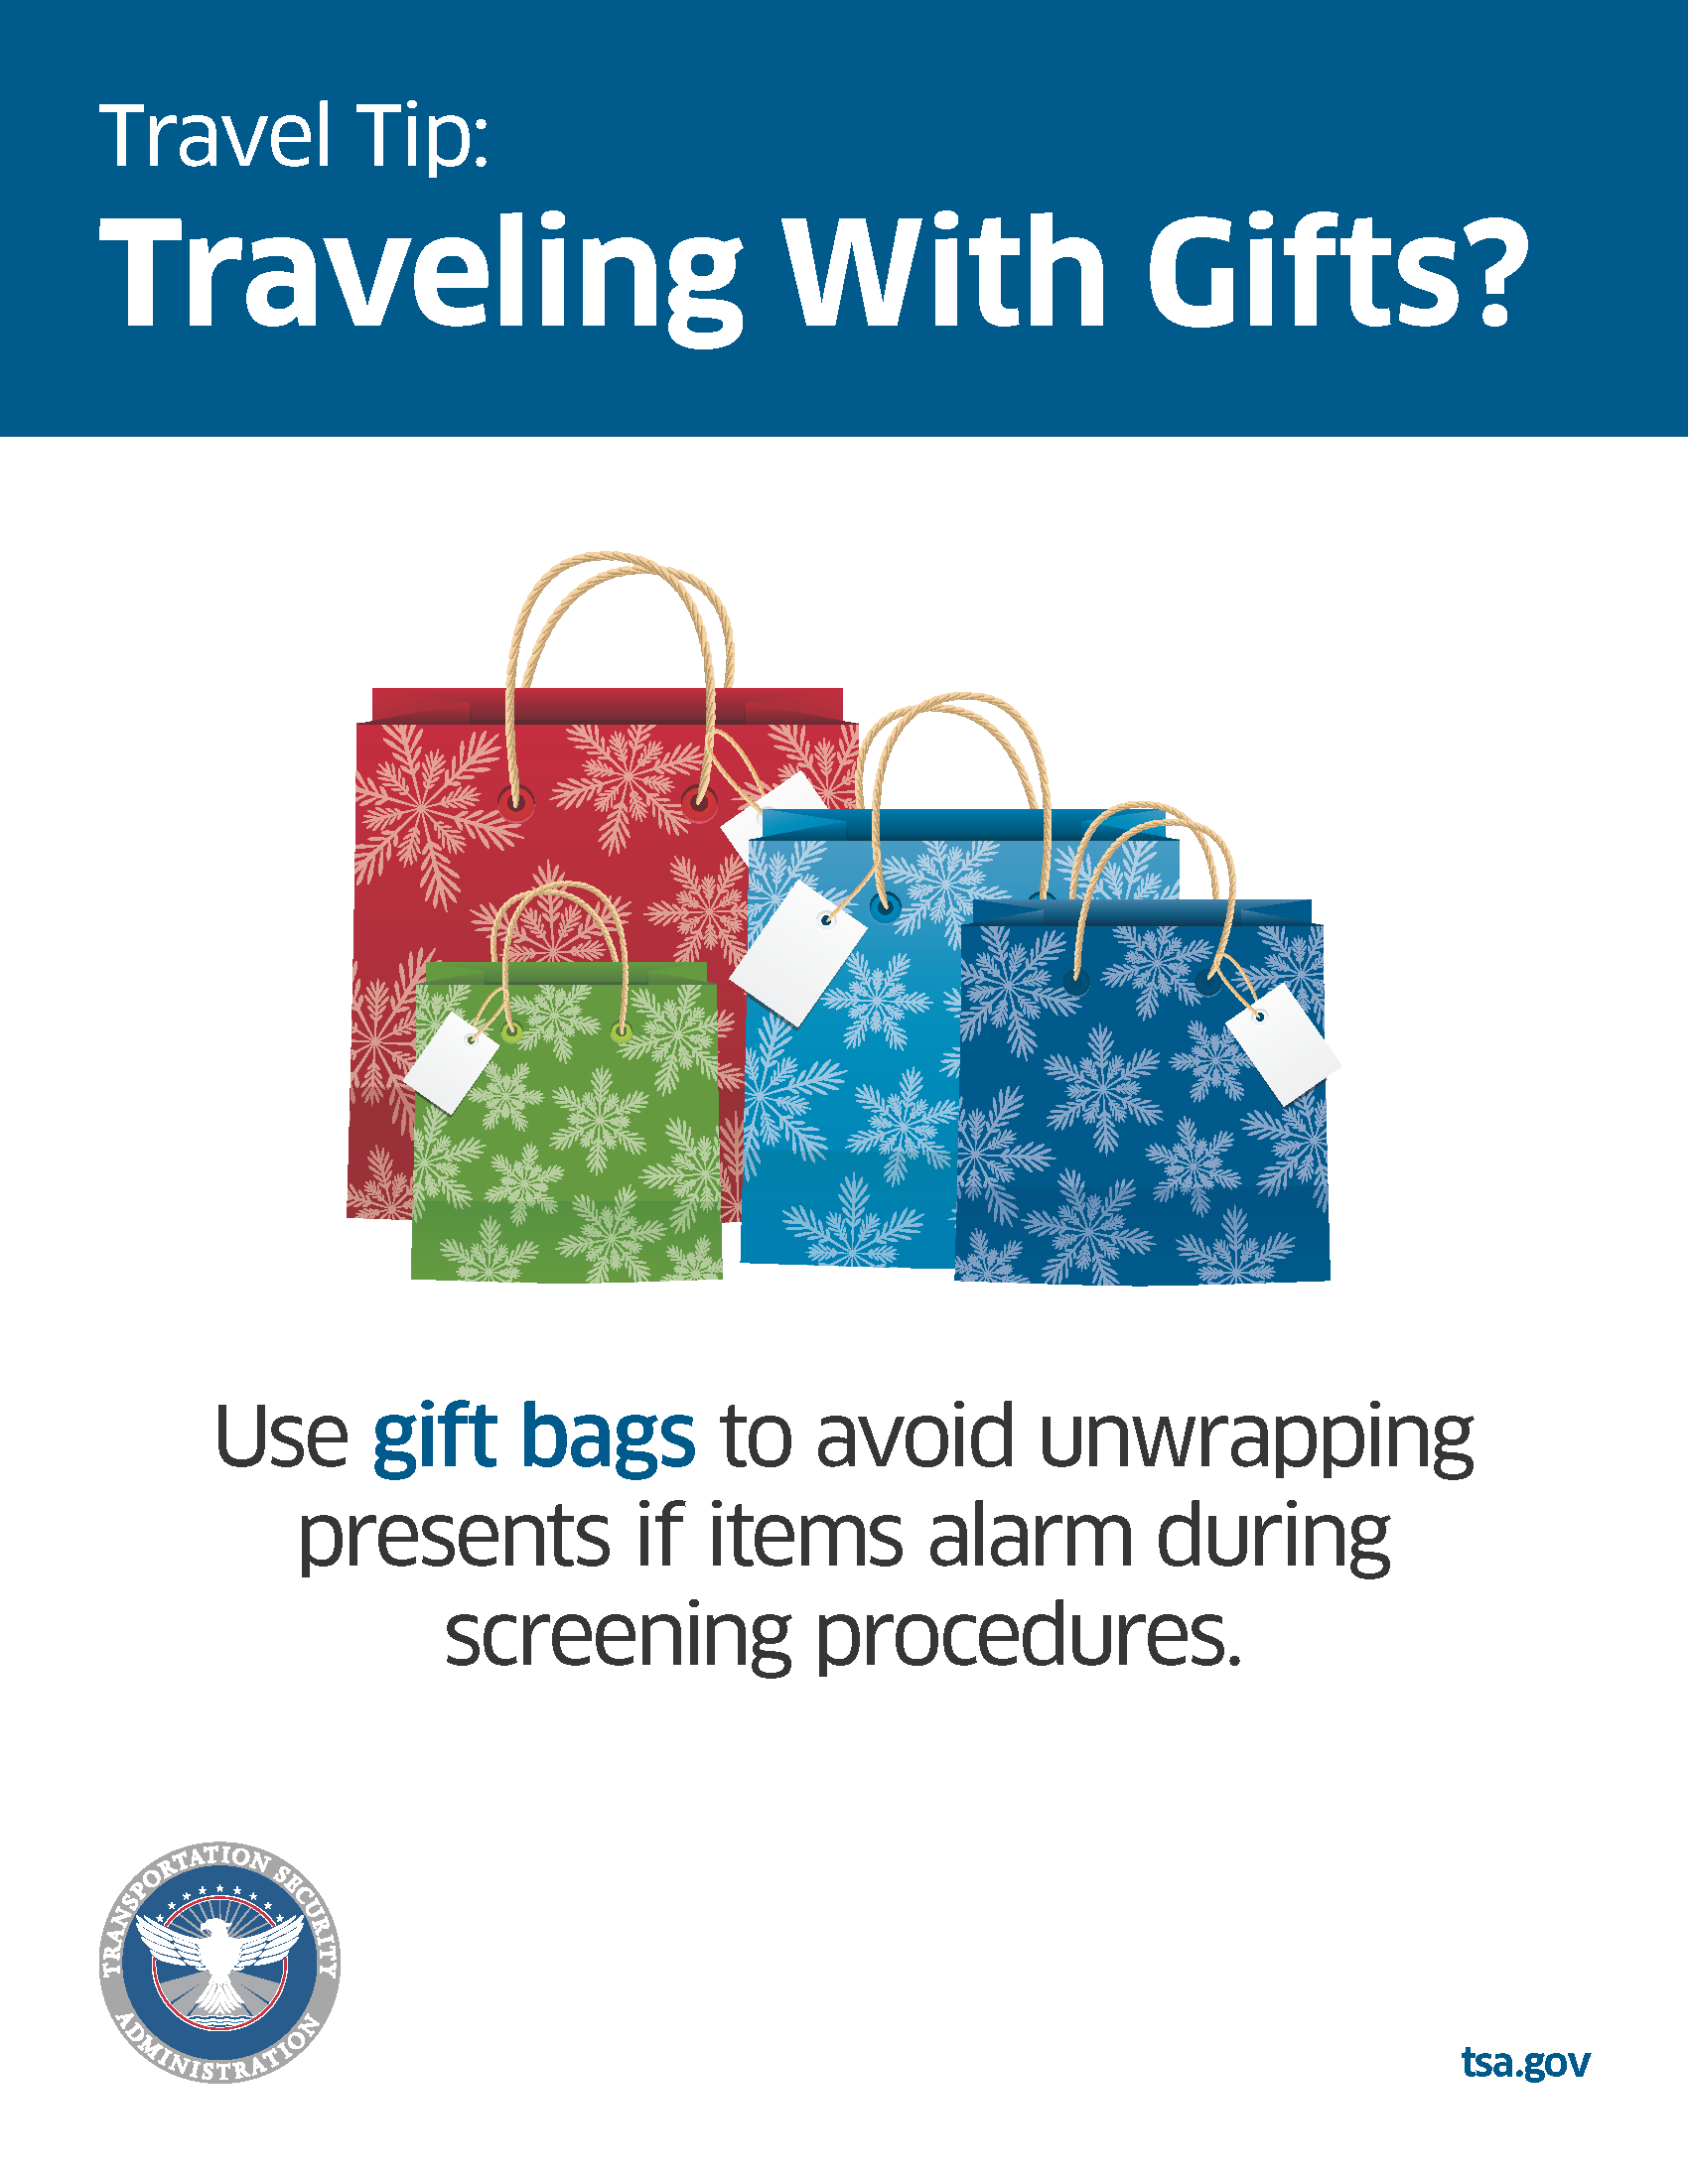 Use of gift boxes and gift bags are recommended for traveling with gifts. (TSA photos)